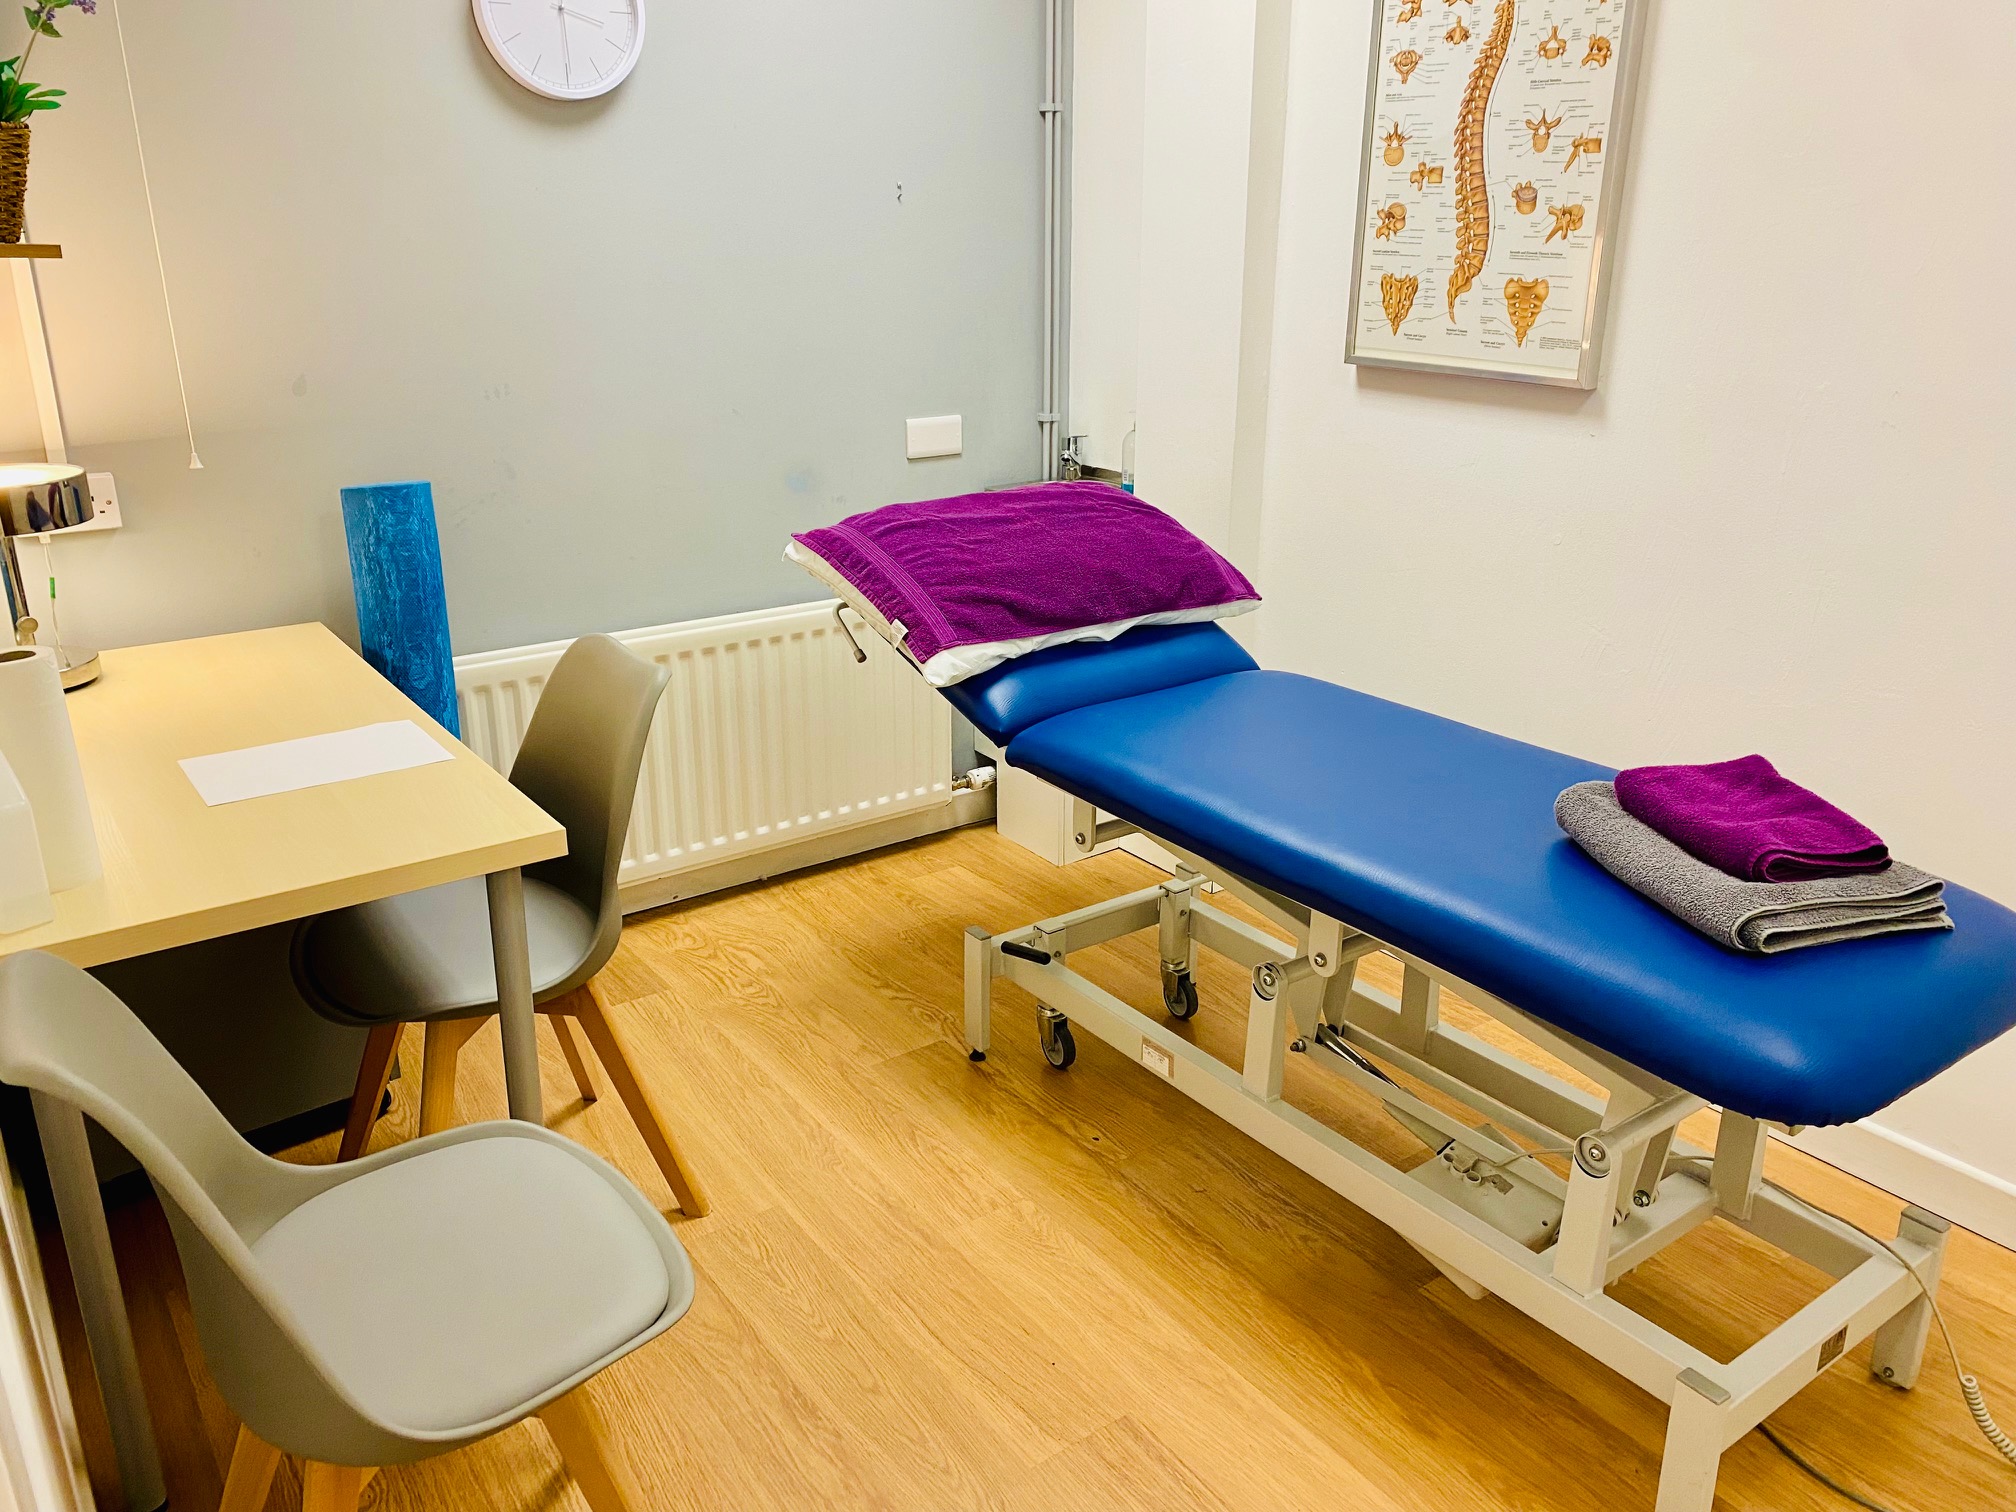 Physiotherapy Clinic and Pilates Studio, PhysioWorks NI Belfast